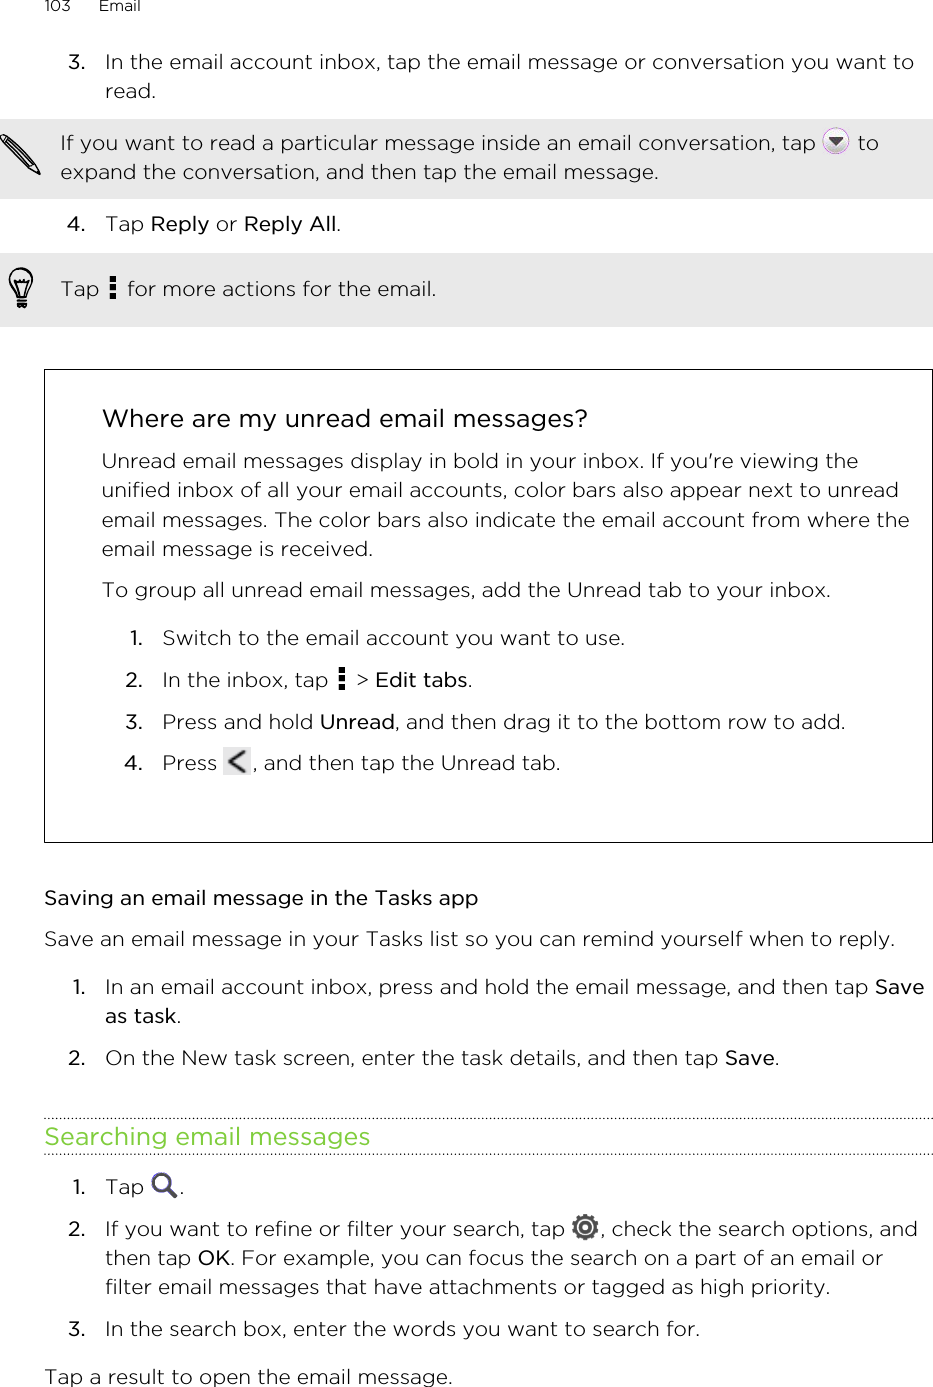 3. In the email account inbox, tap the email message or conversation you want toread. If you want to read a particular message inside an email conversation, tap   toexpand the conversation, and then tap the email message.4. Tap Reply or Reply All. Tap   for more actions for the email.Where are my unread email messages?Unread email messages display in bold in your inbox. If you&apos;re viewing theunified inbox of all your email accounts, color bars also appear next to unreademail messages. The color bars also indicate the email account from where theemail message is received.To group all unread email messages, add the Unread tab to your inbox.1. Switch to the email account you want to use.2. In the inbox, tap   &gt; Edit tabs.3. Press and hold Unread, and then drag it to the bottom row to add.4. Press  , and then tap the Unread tab.Saving an email message in the Tasks appSave an email message in your Tasks list so you can remind yourself when to reply.1. In an email account inbox, press and hold the email message, and then tap Saveas task.2. On the New task screen, enter the task details, and then tap Save.Searching email messages1. Tap  .2. If you want to refine or filter your search, tap  , check the search options, andthen tap OK. For example, you can focus the search on a part of an email orfilter email messages that have attachments or tagged as high priority.3. In the search box, enter the words you want to search for.Tap a result to open the email message.103 Email